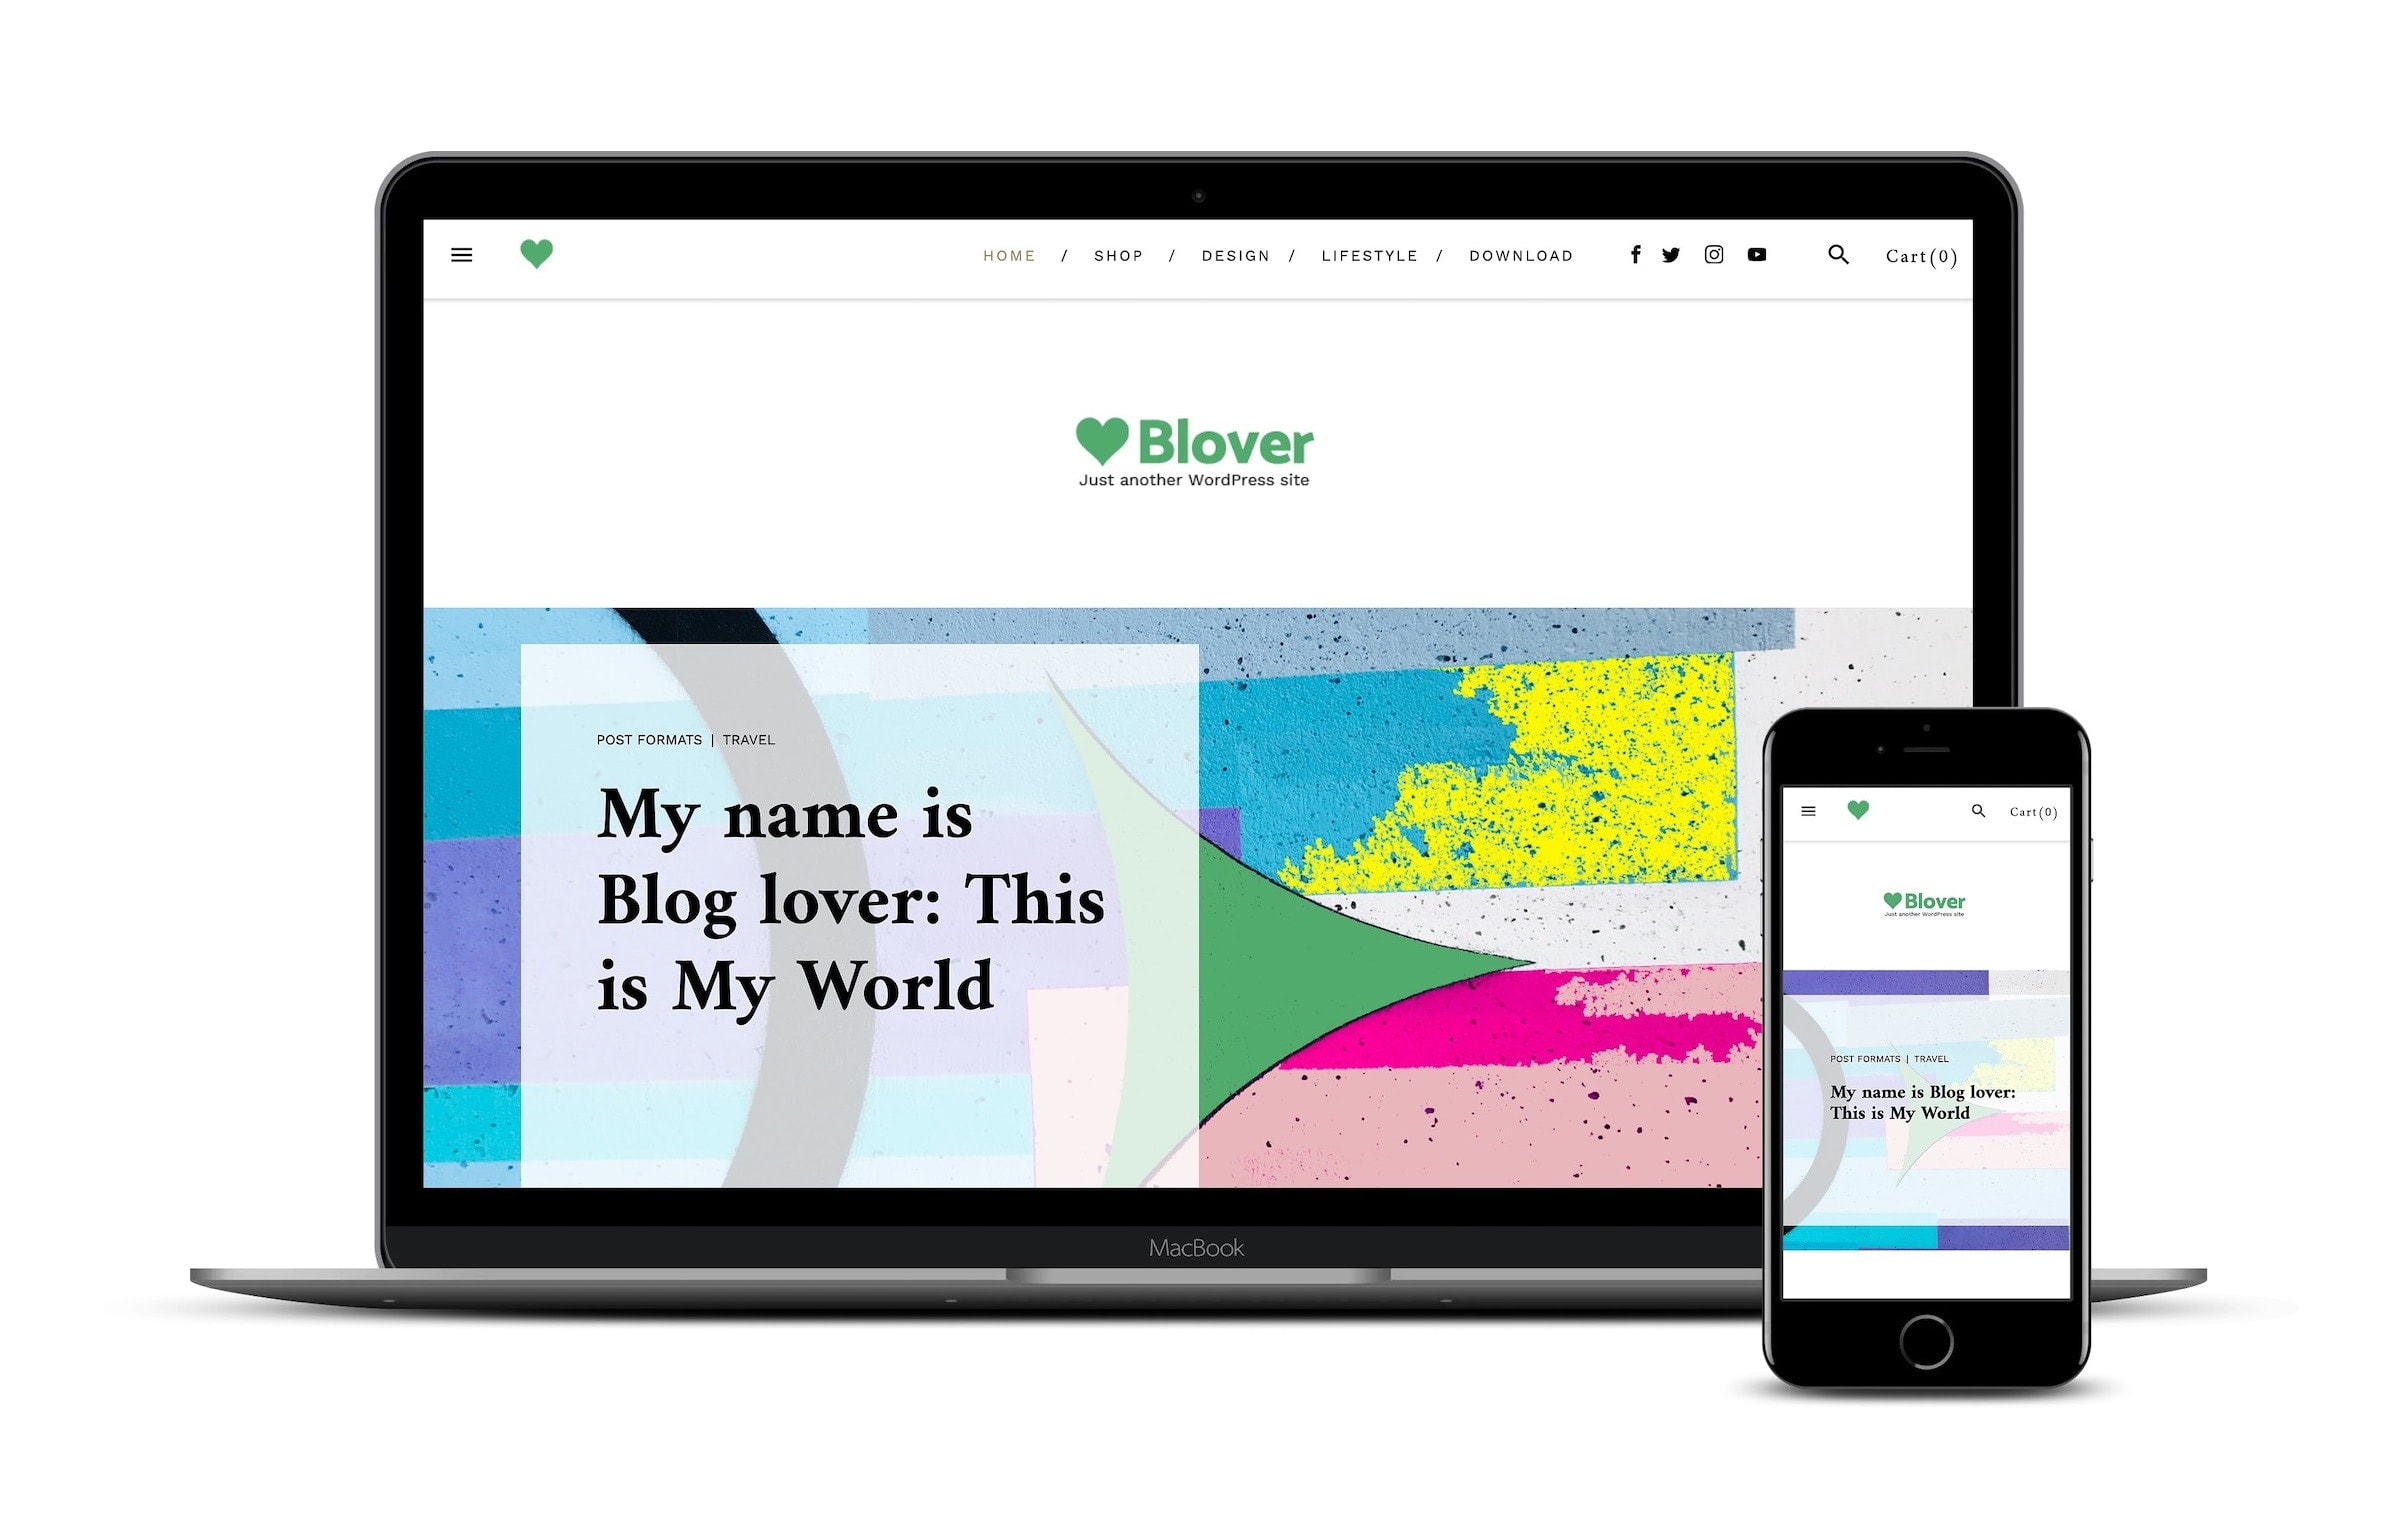 Blover is a WordPress theme